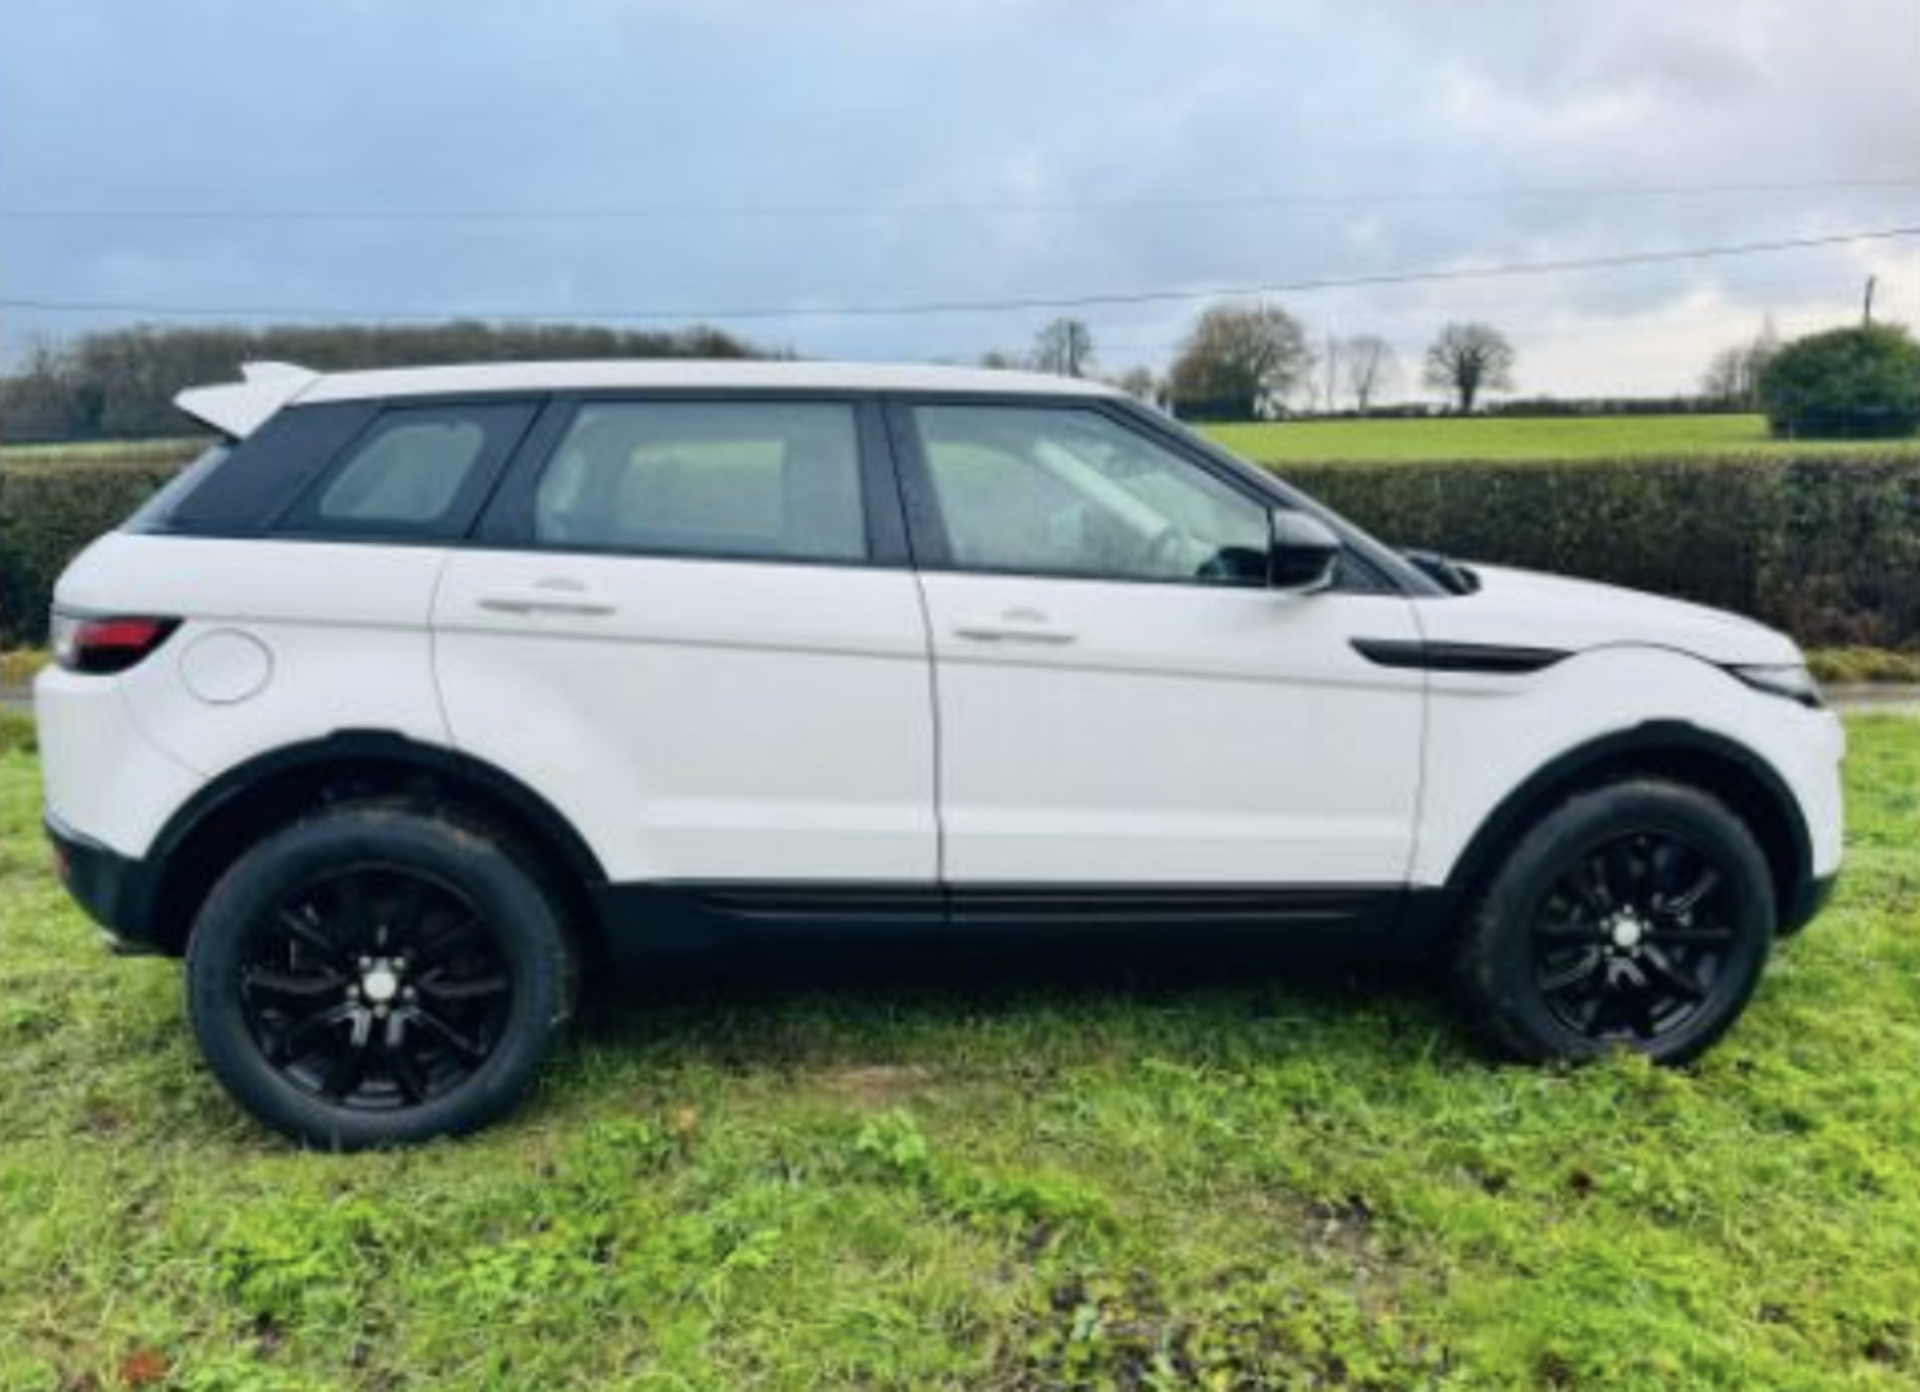 *RESERVE MET* RANGE ROVER EVOQUE 2.0 TD4 SE Tech 5dr Automatic - 2016 - Pan Roof - Air con - Full L - Image 3 of 11